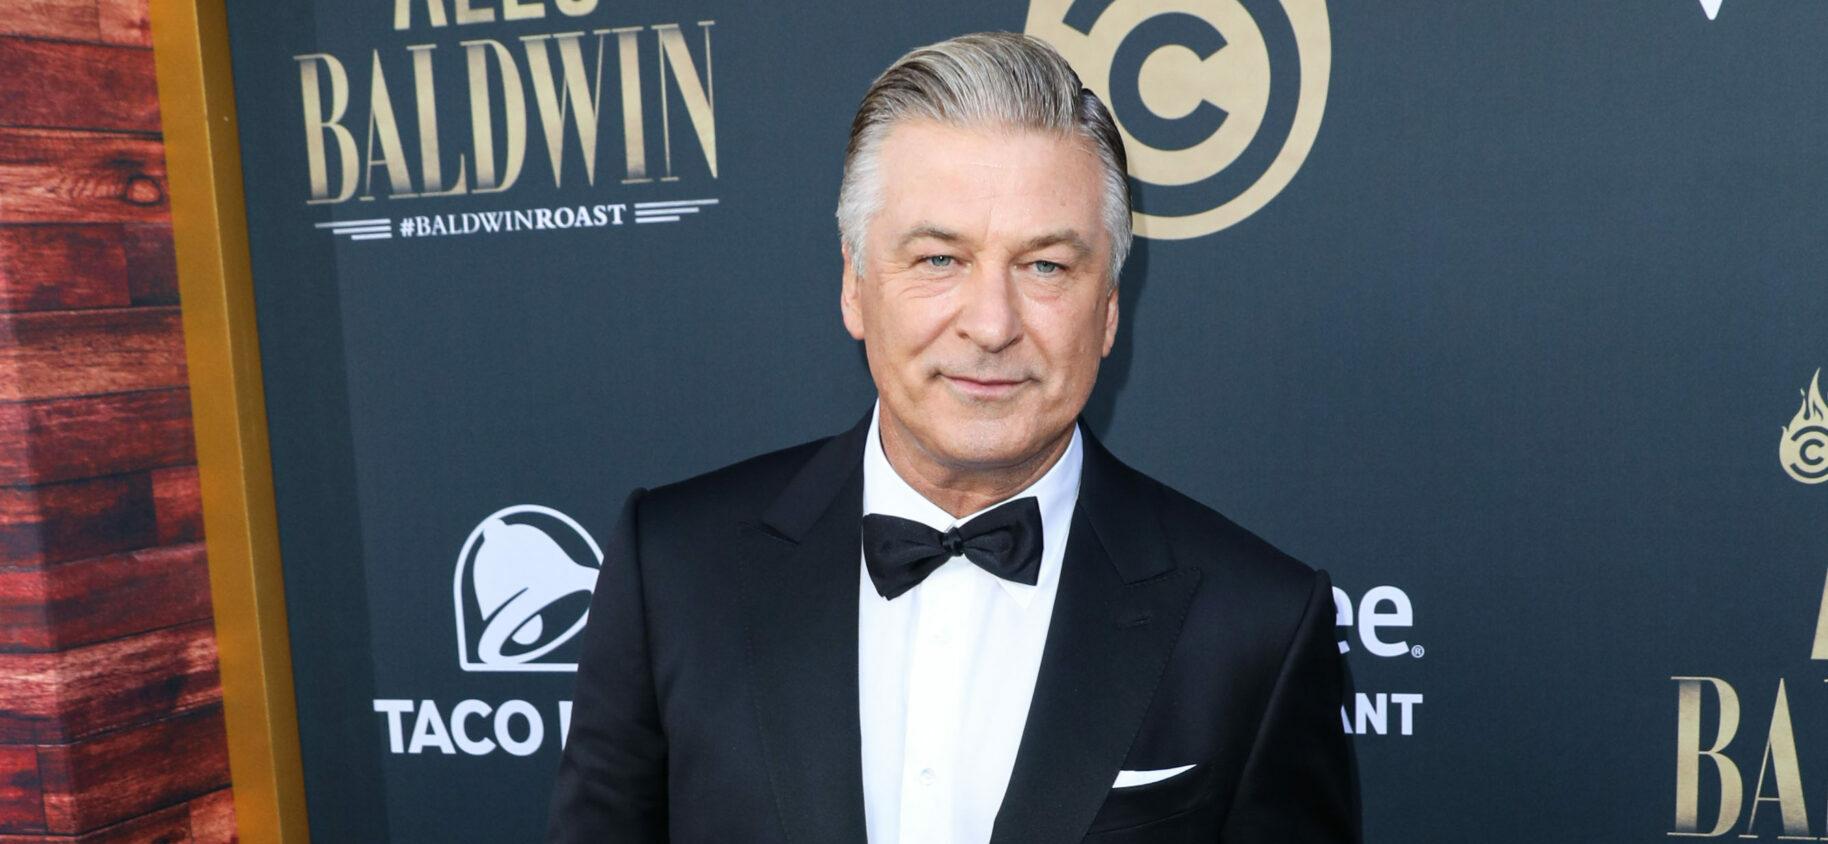 Alec Baldwin Says His ‘Faith’ Sustains Him During ‘The Toughest Times’